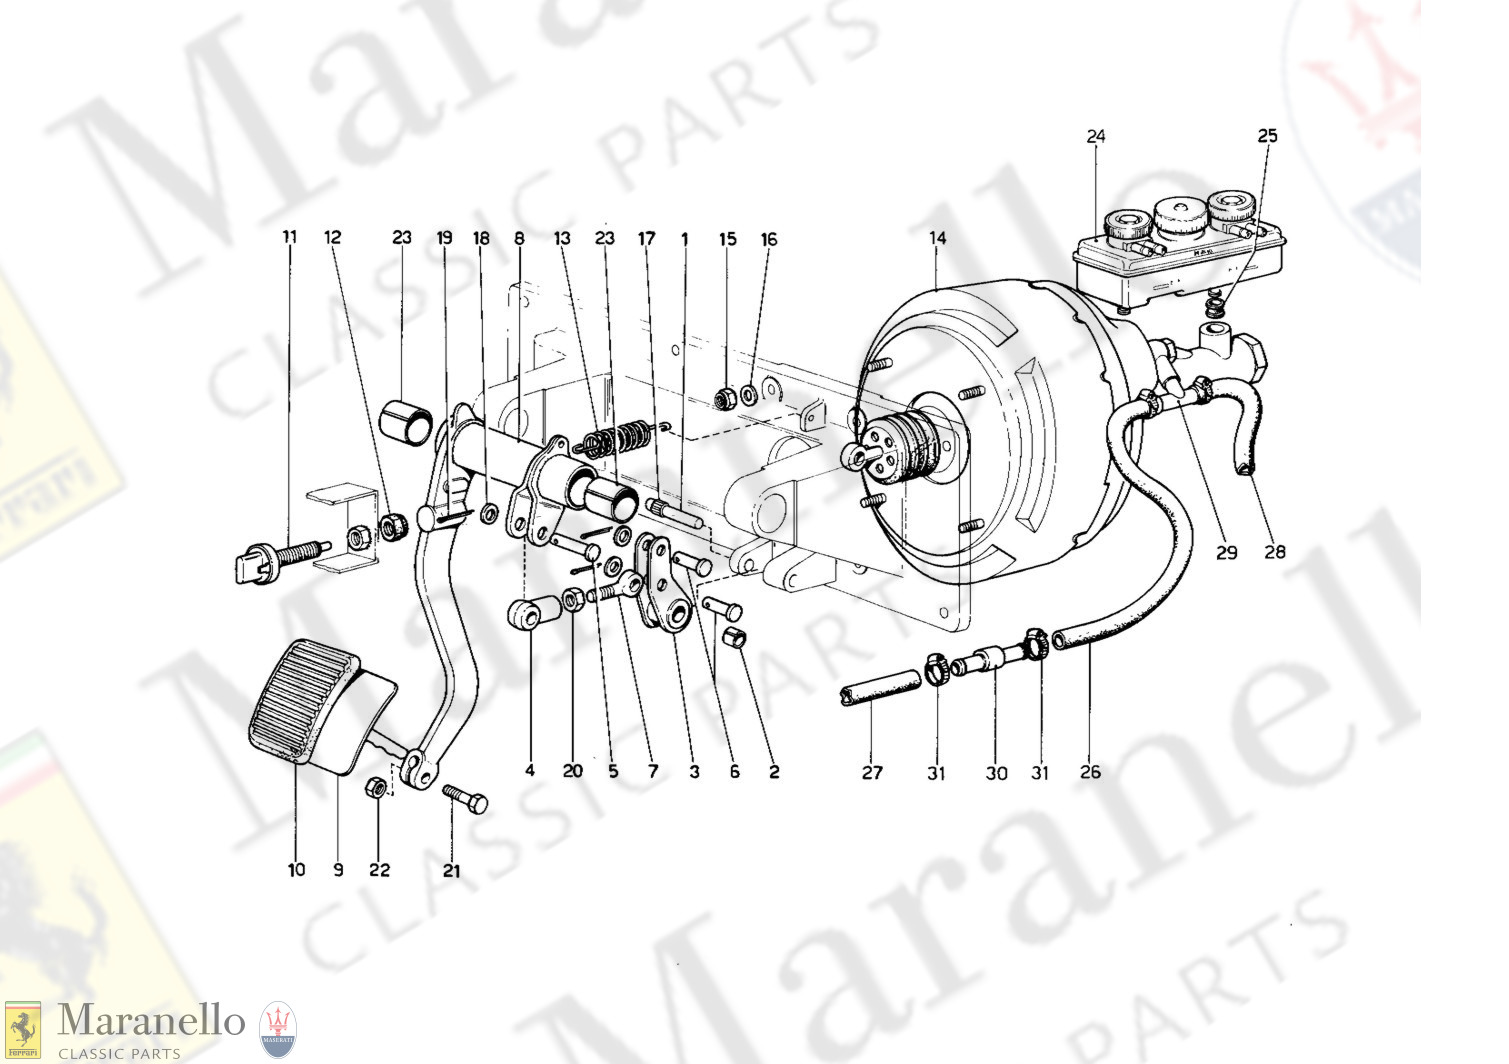 056 - Brakes Hydraulc Drive (400 Gt - Variants For RHD Version)